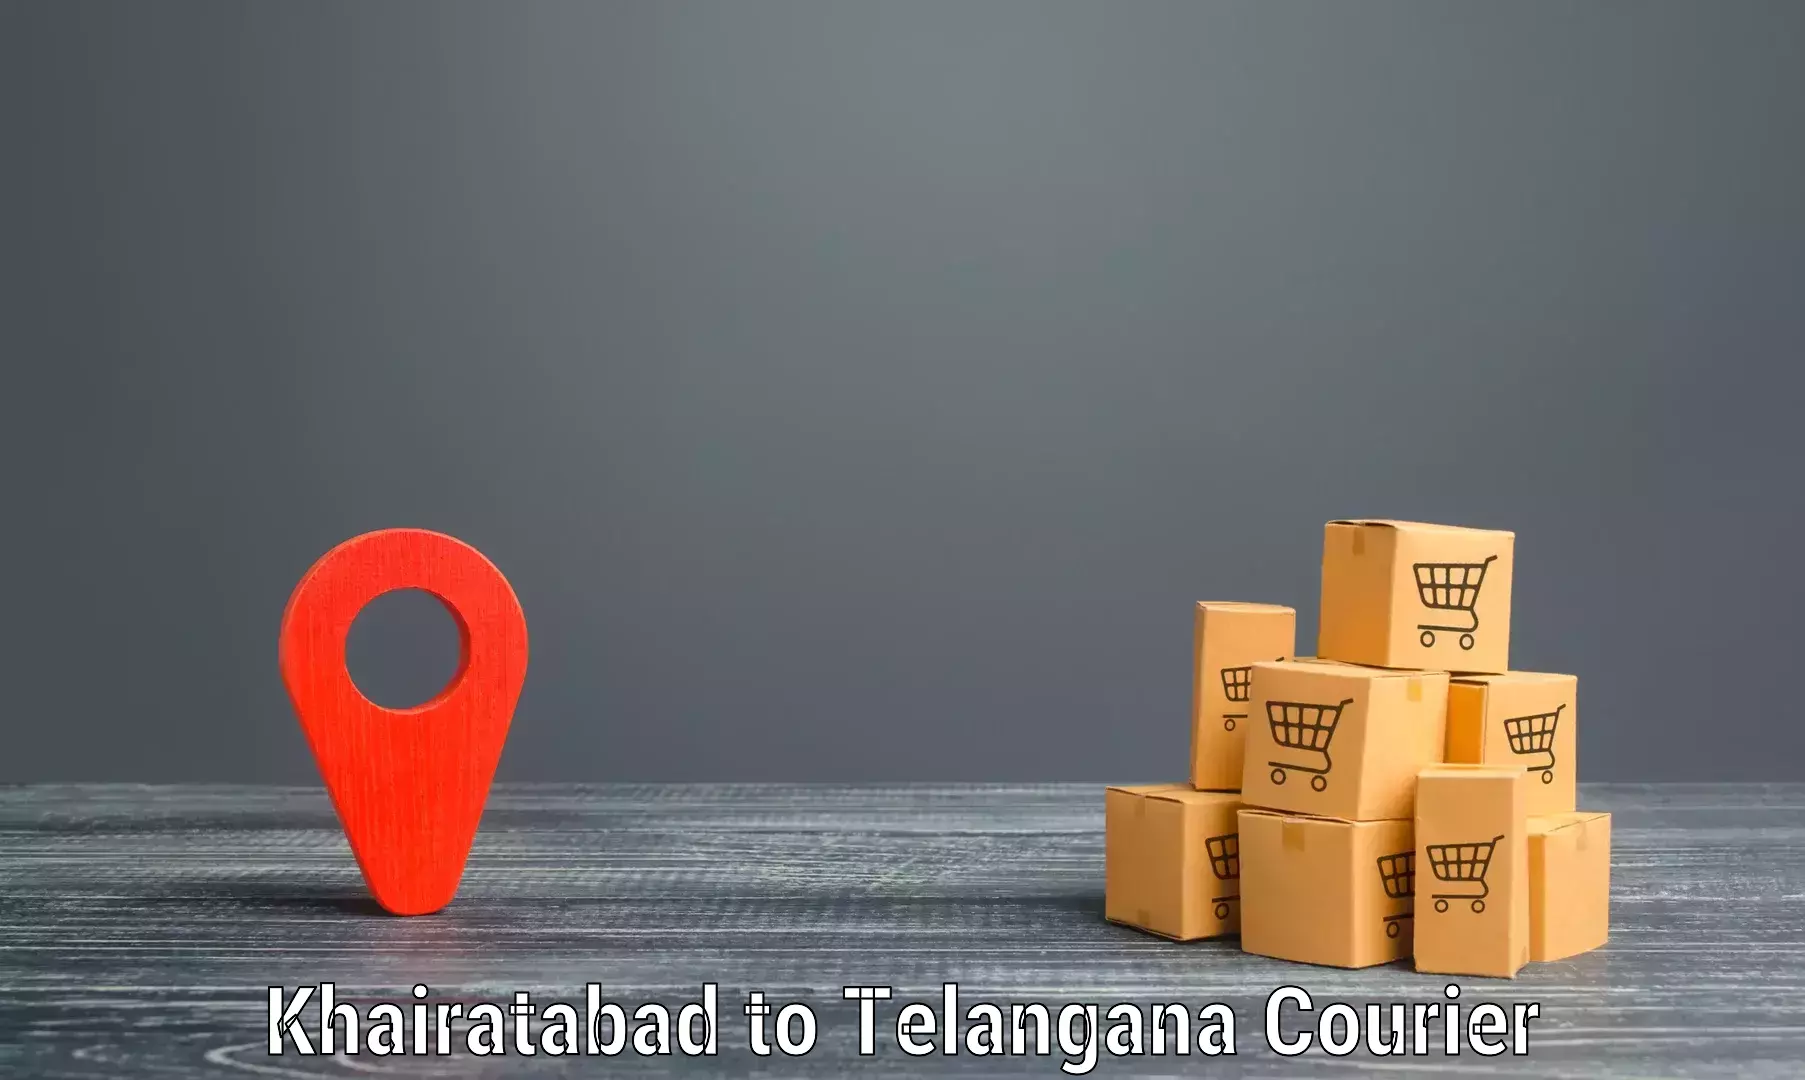 Ocean freight courier Khairatabad to Secunderabad